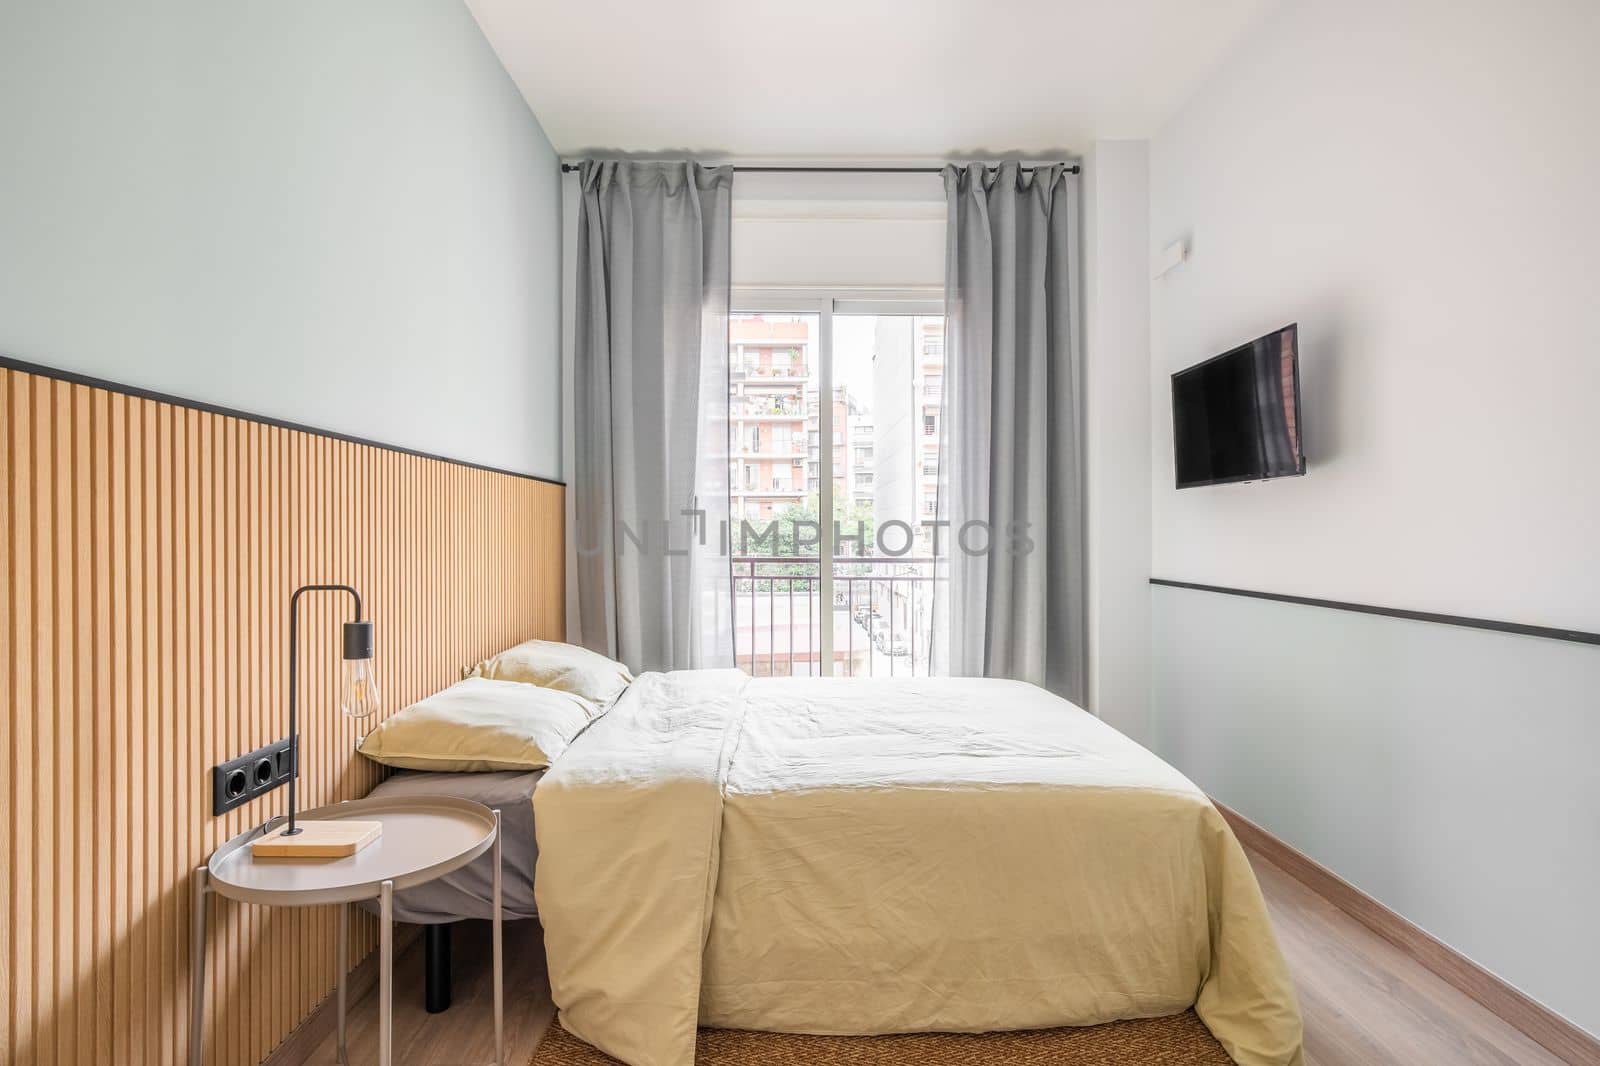 Bedroom with large bed for two persons against backdrop of glass sliding door with access to small balcony. Curtains on door protect from bright sun during day. On wall is TV for watching movies. by apavlin